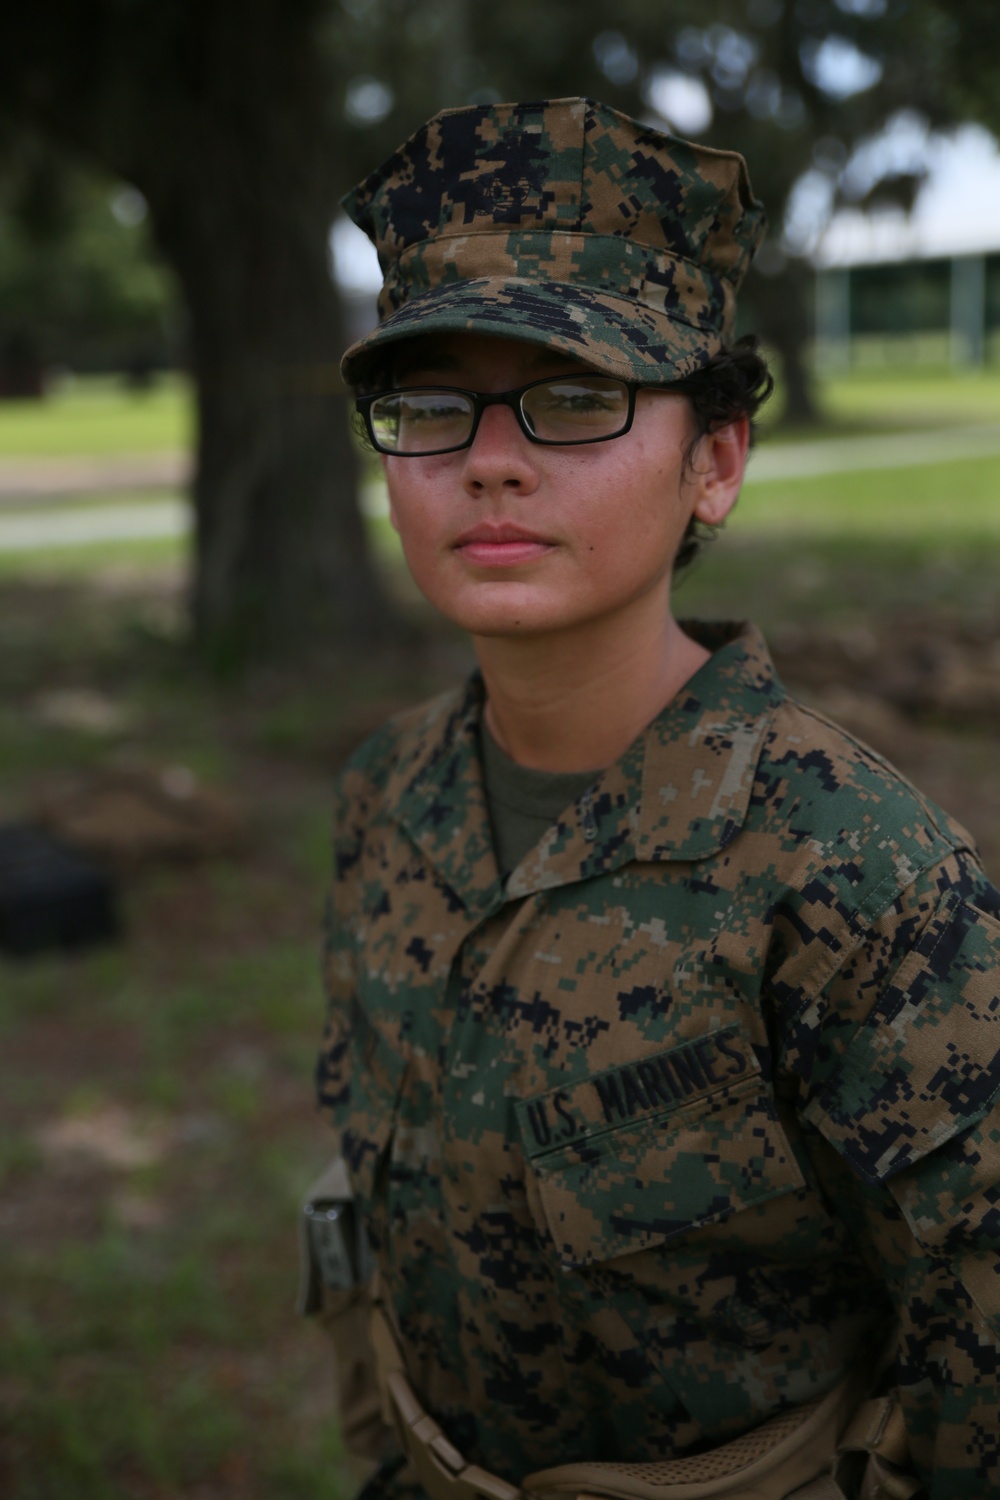 Hollywood, Fla., native training at Parris Island to become U.S. Marine